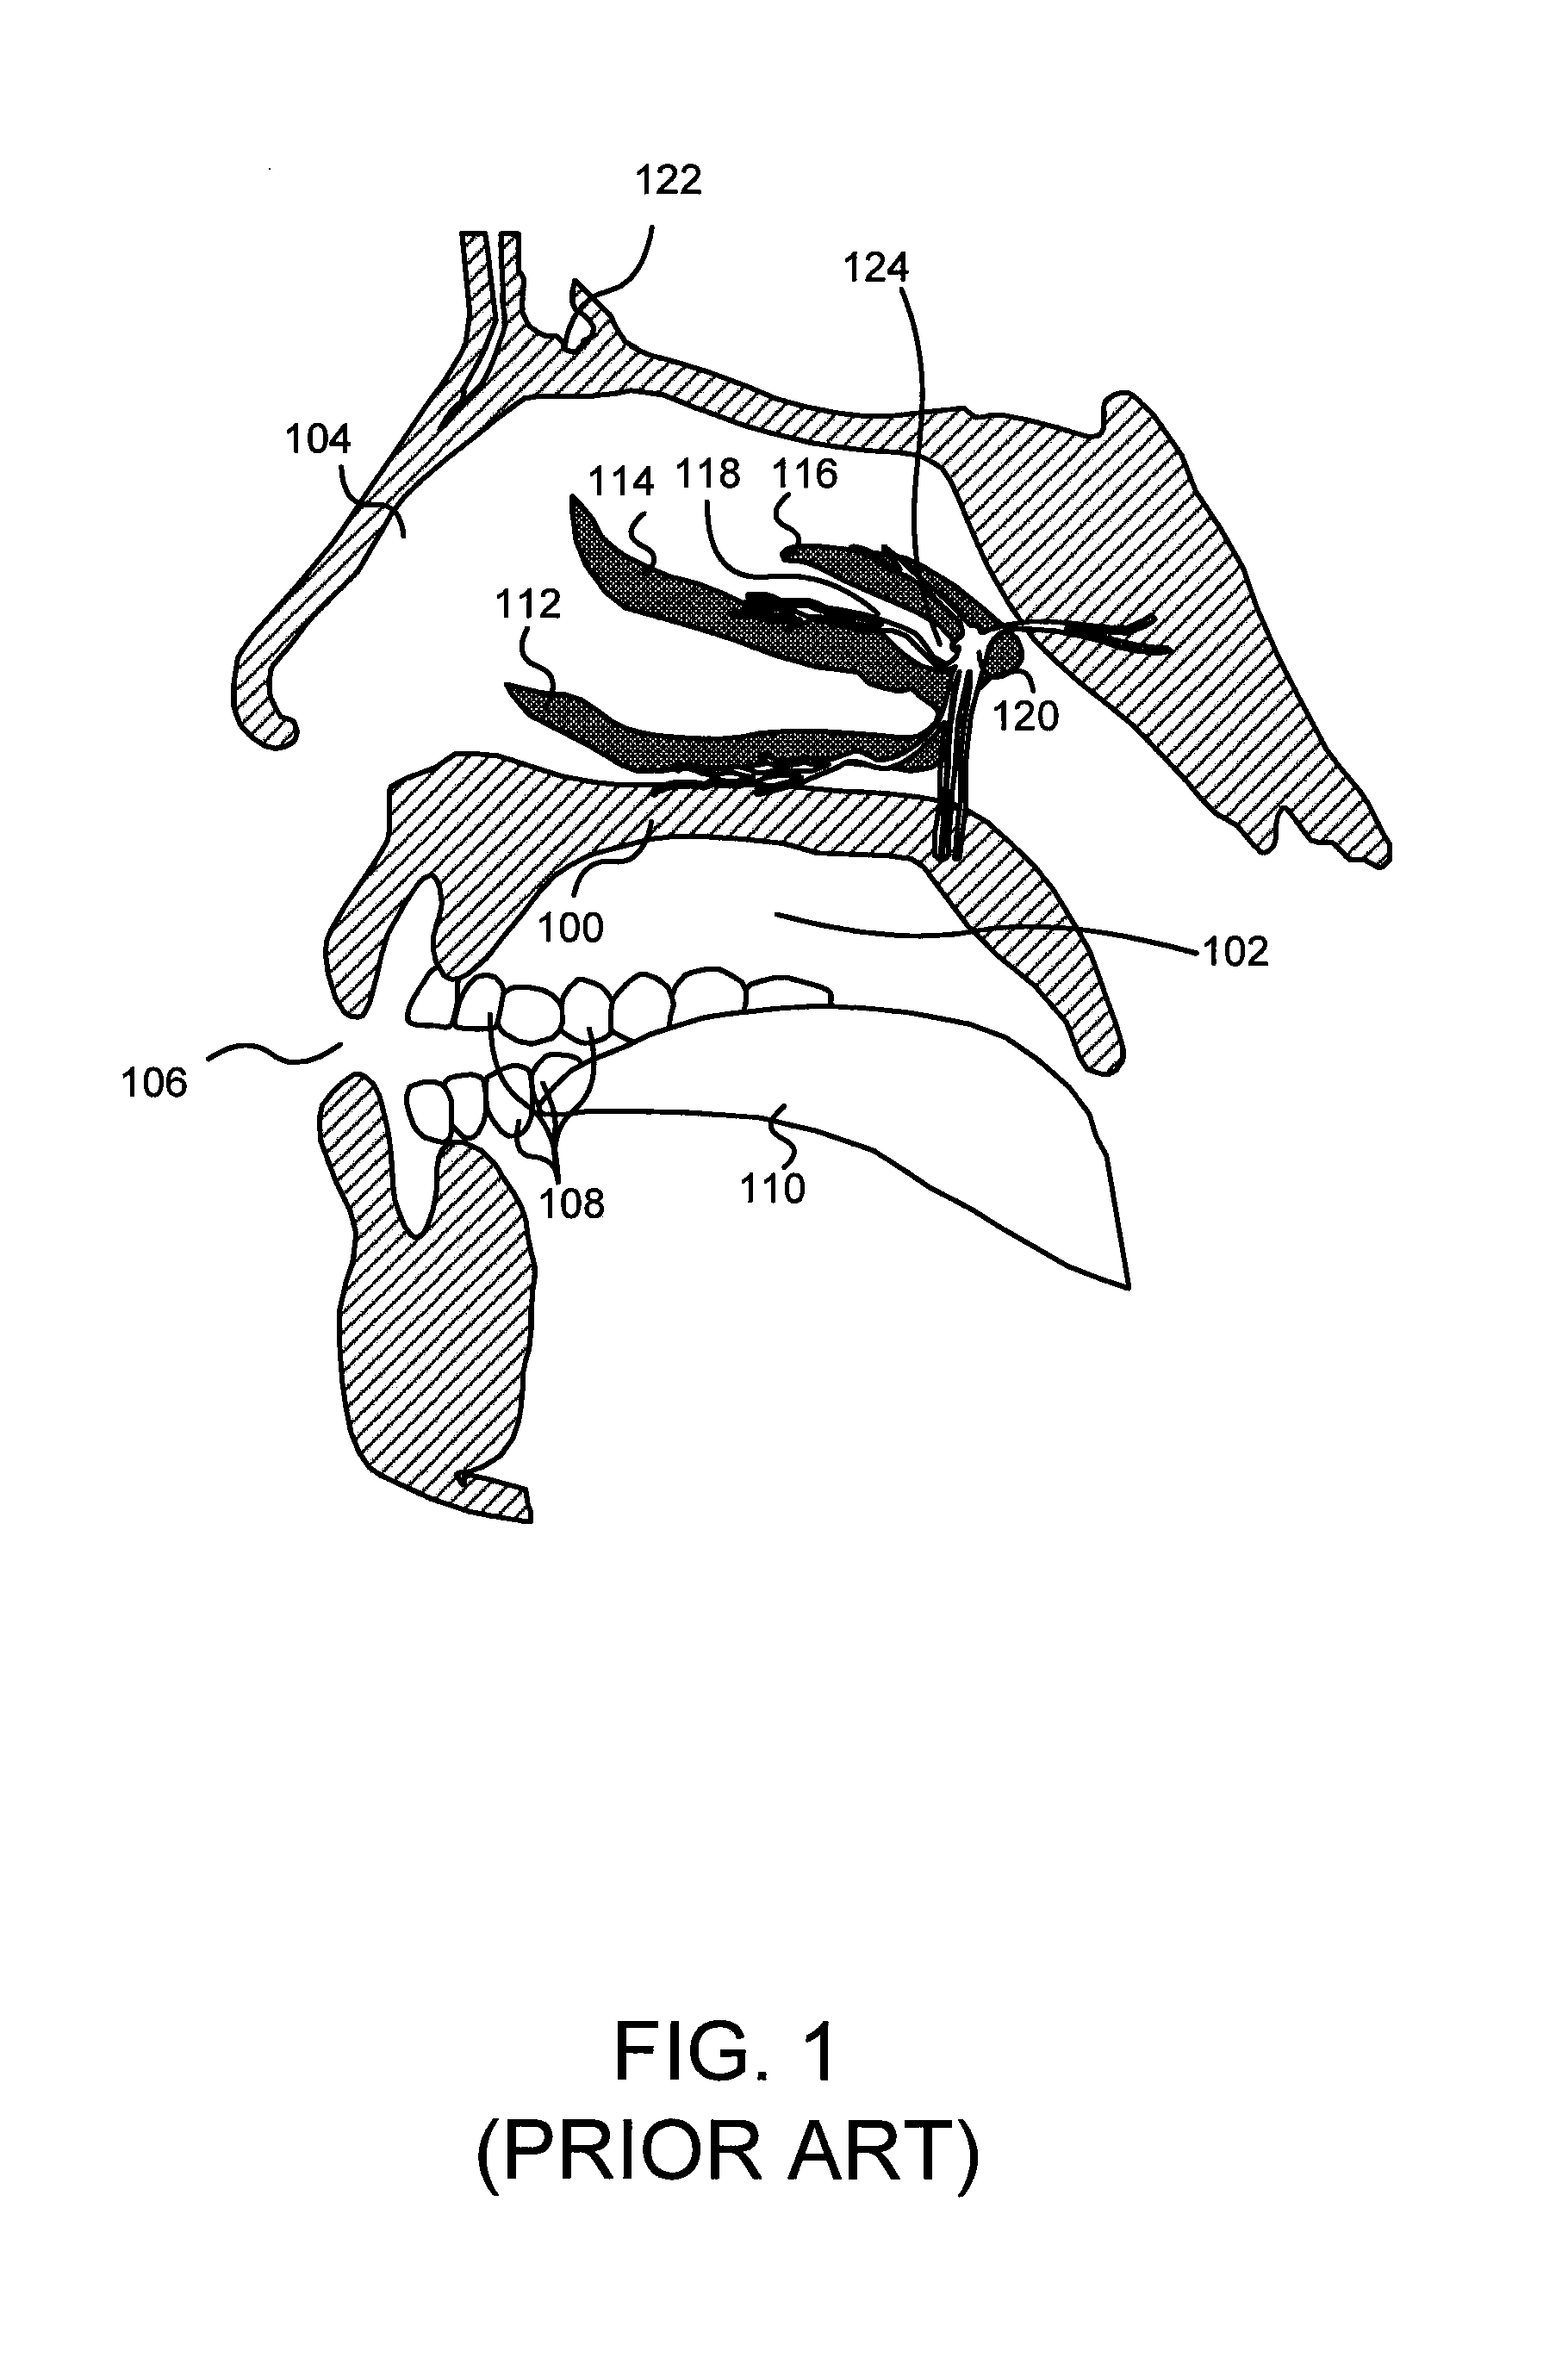 Enhanced systems, processes and apparatus for facilitating intranasal treatment of a patient and products thereby